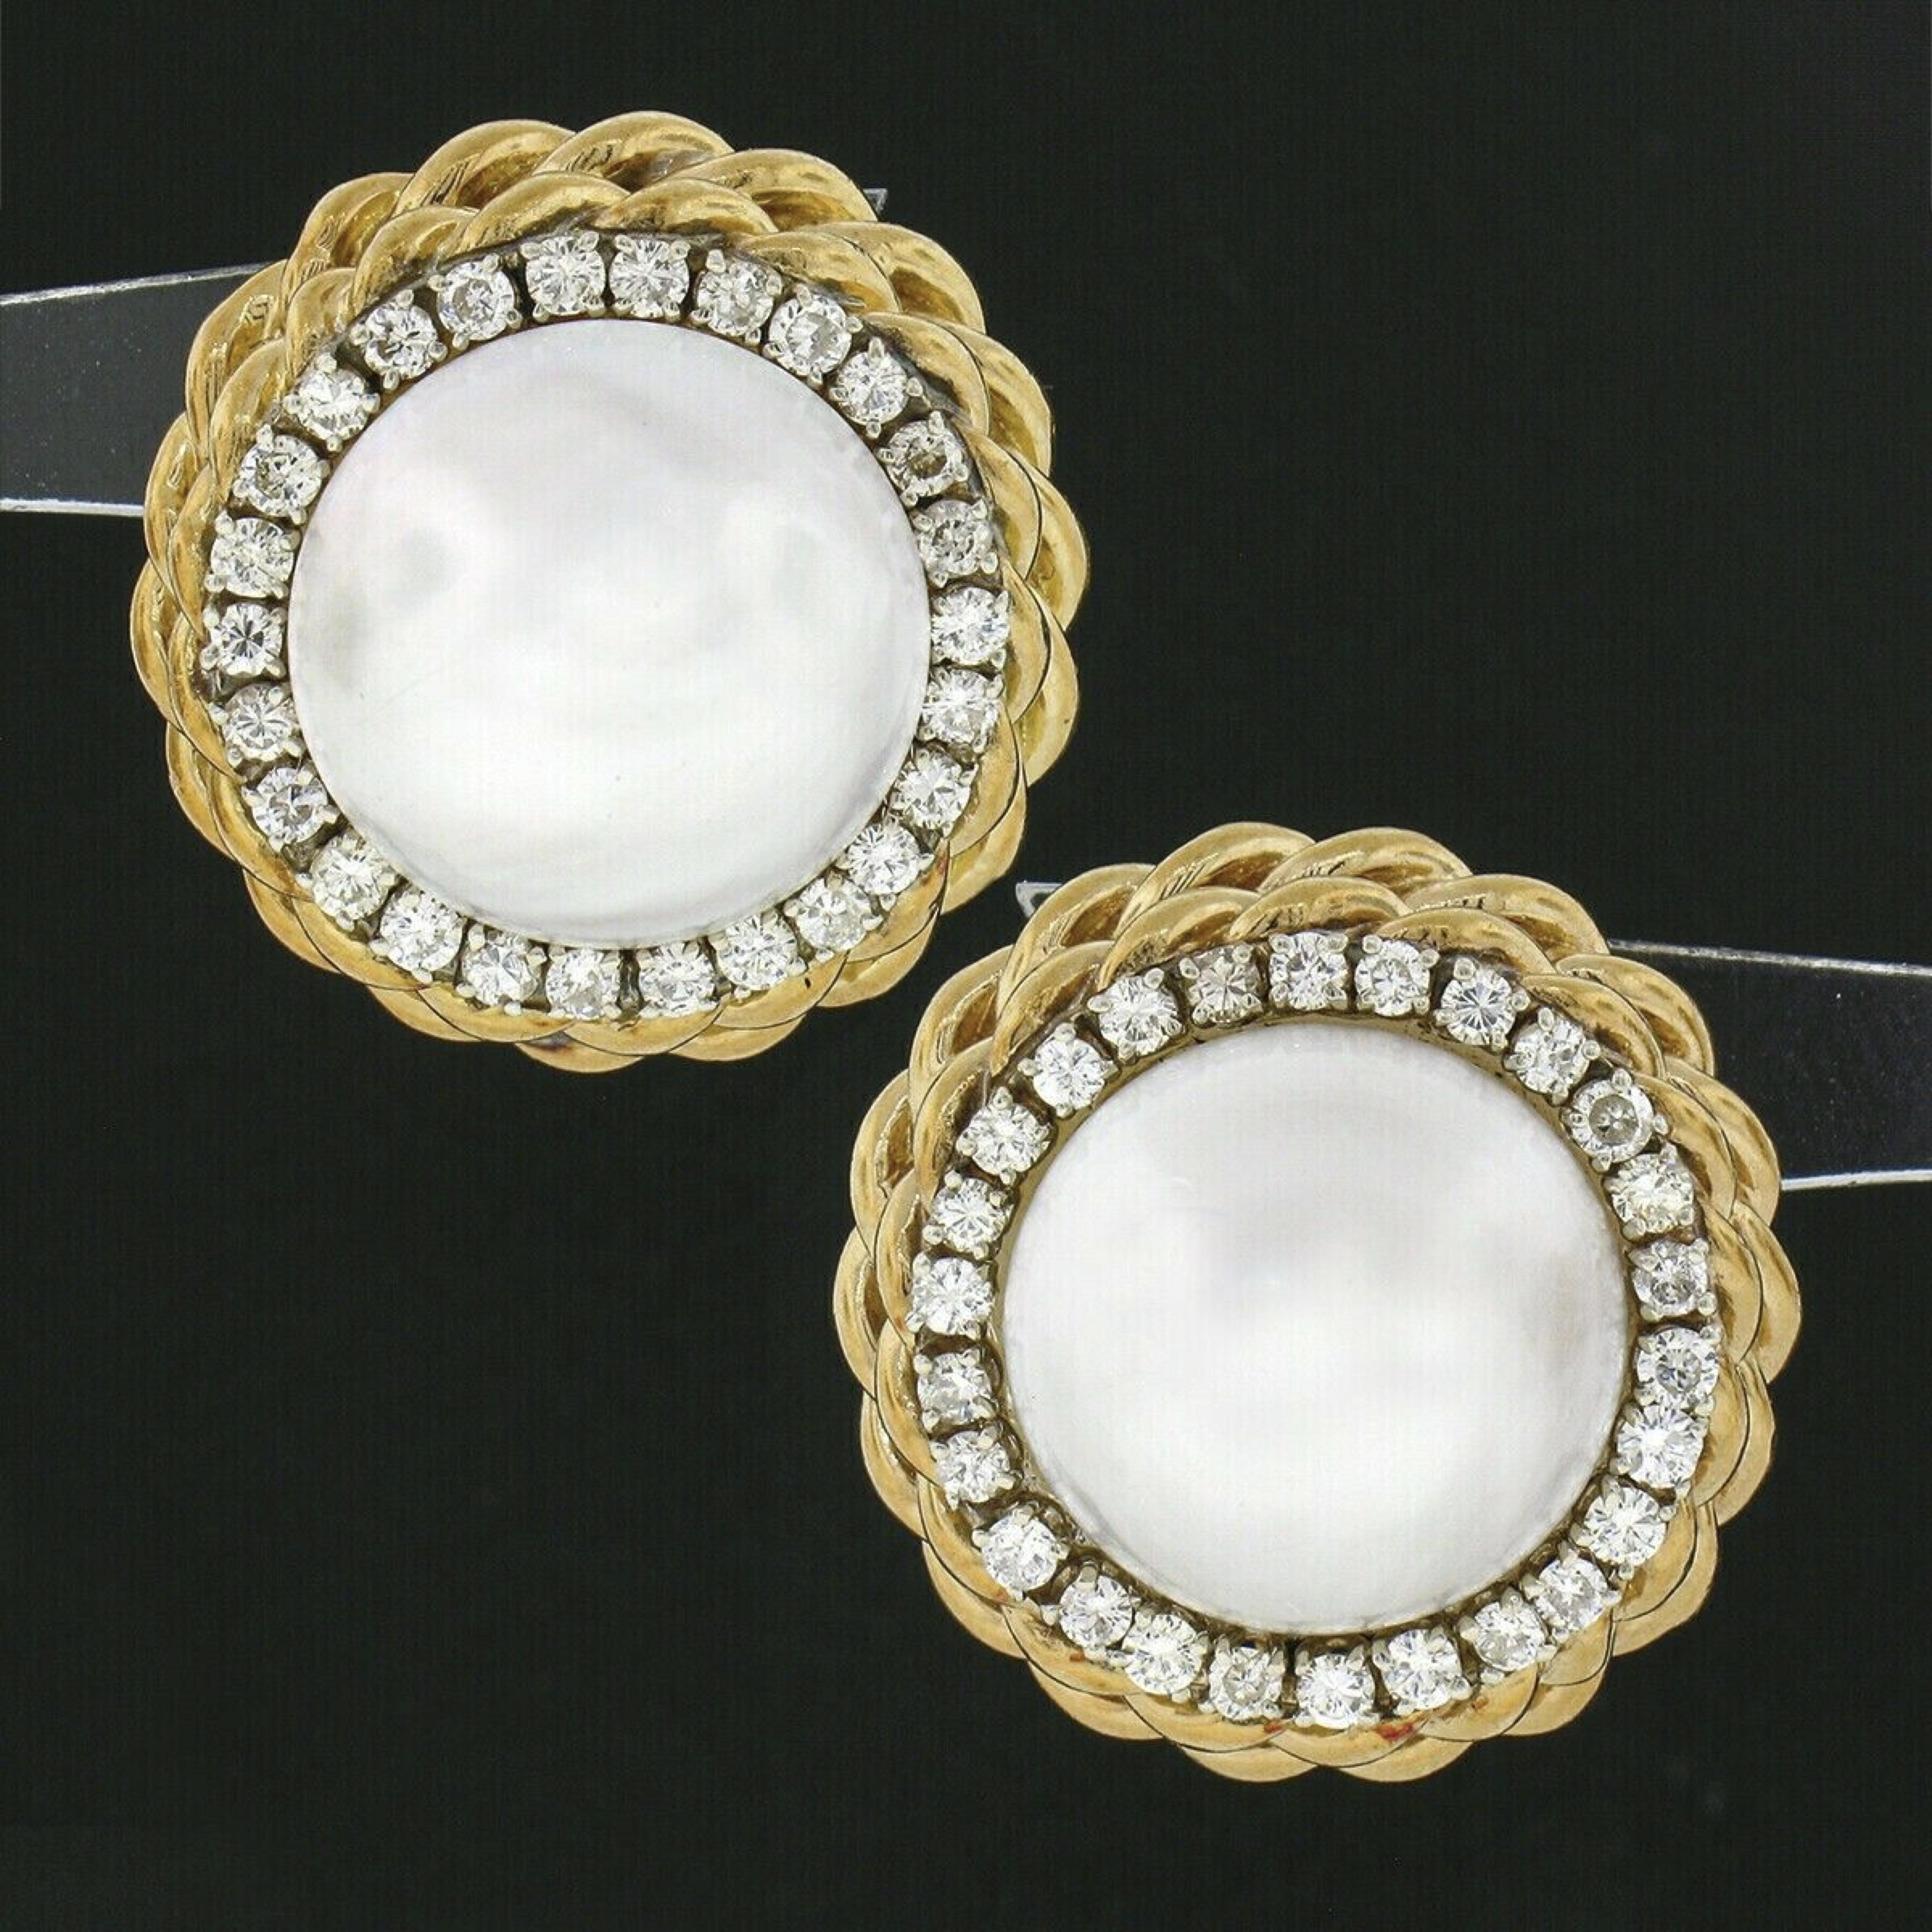 These magnificent and super classy vintage statement earrings are crafted in solid 18k yellow gold. They each feature a large and very nice quality mabe pearl at their center, measuring approximately 15-15.4mm, and display an amazing bright white